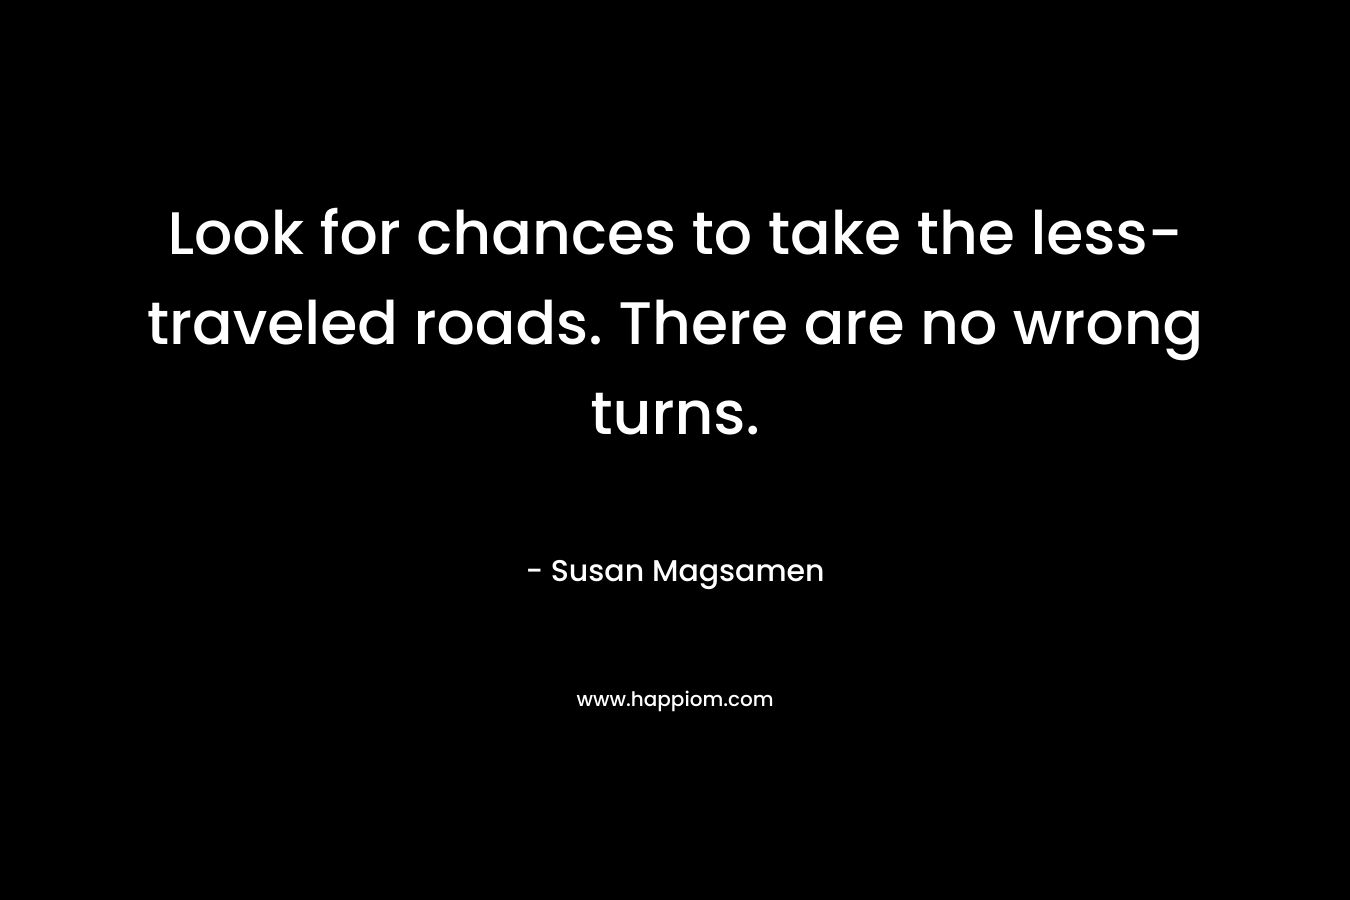 Look for chances to take the less-traveled roads. There are no wrong turns.